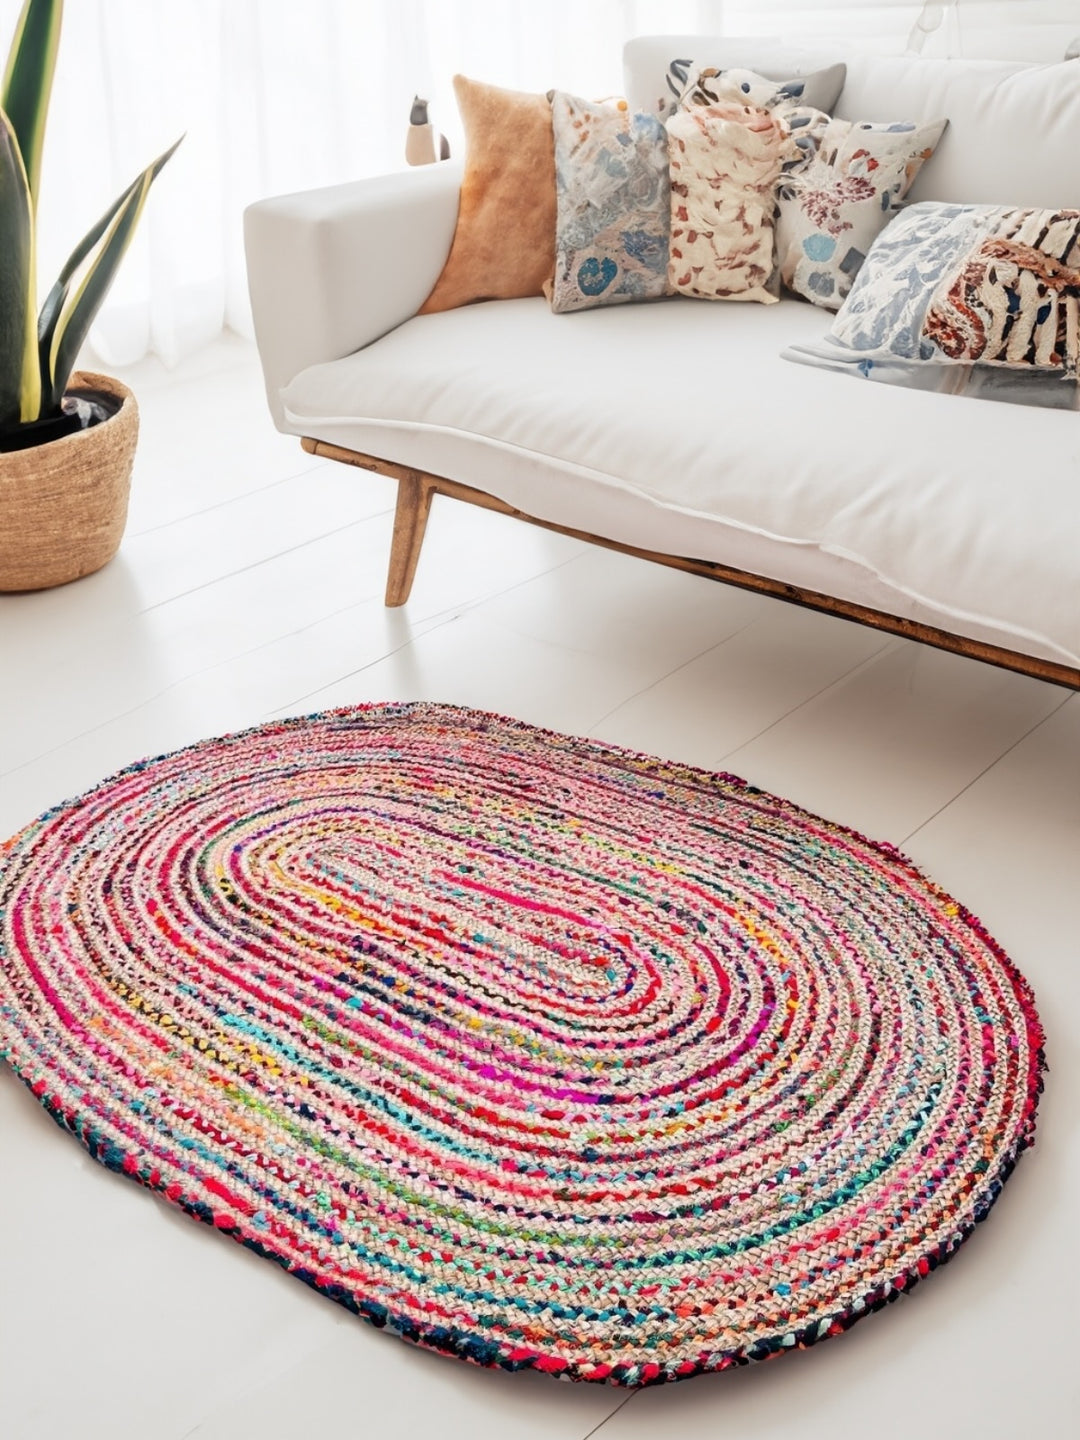 MISHRAN Oval Rug Jute Hand Woven with Recycled Fabric